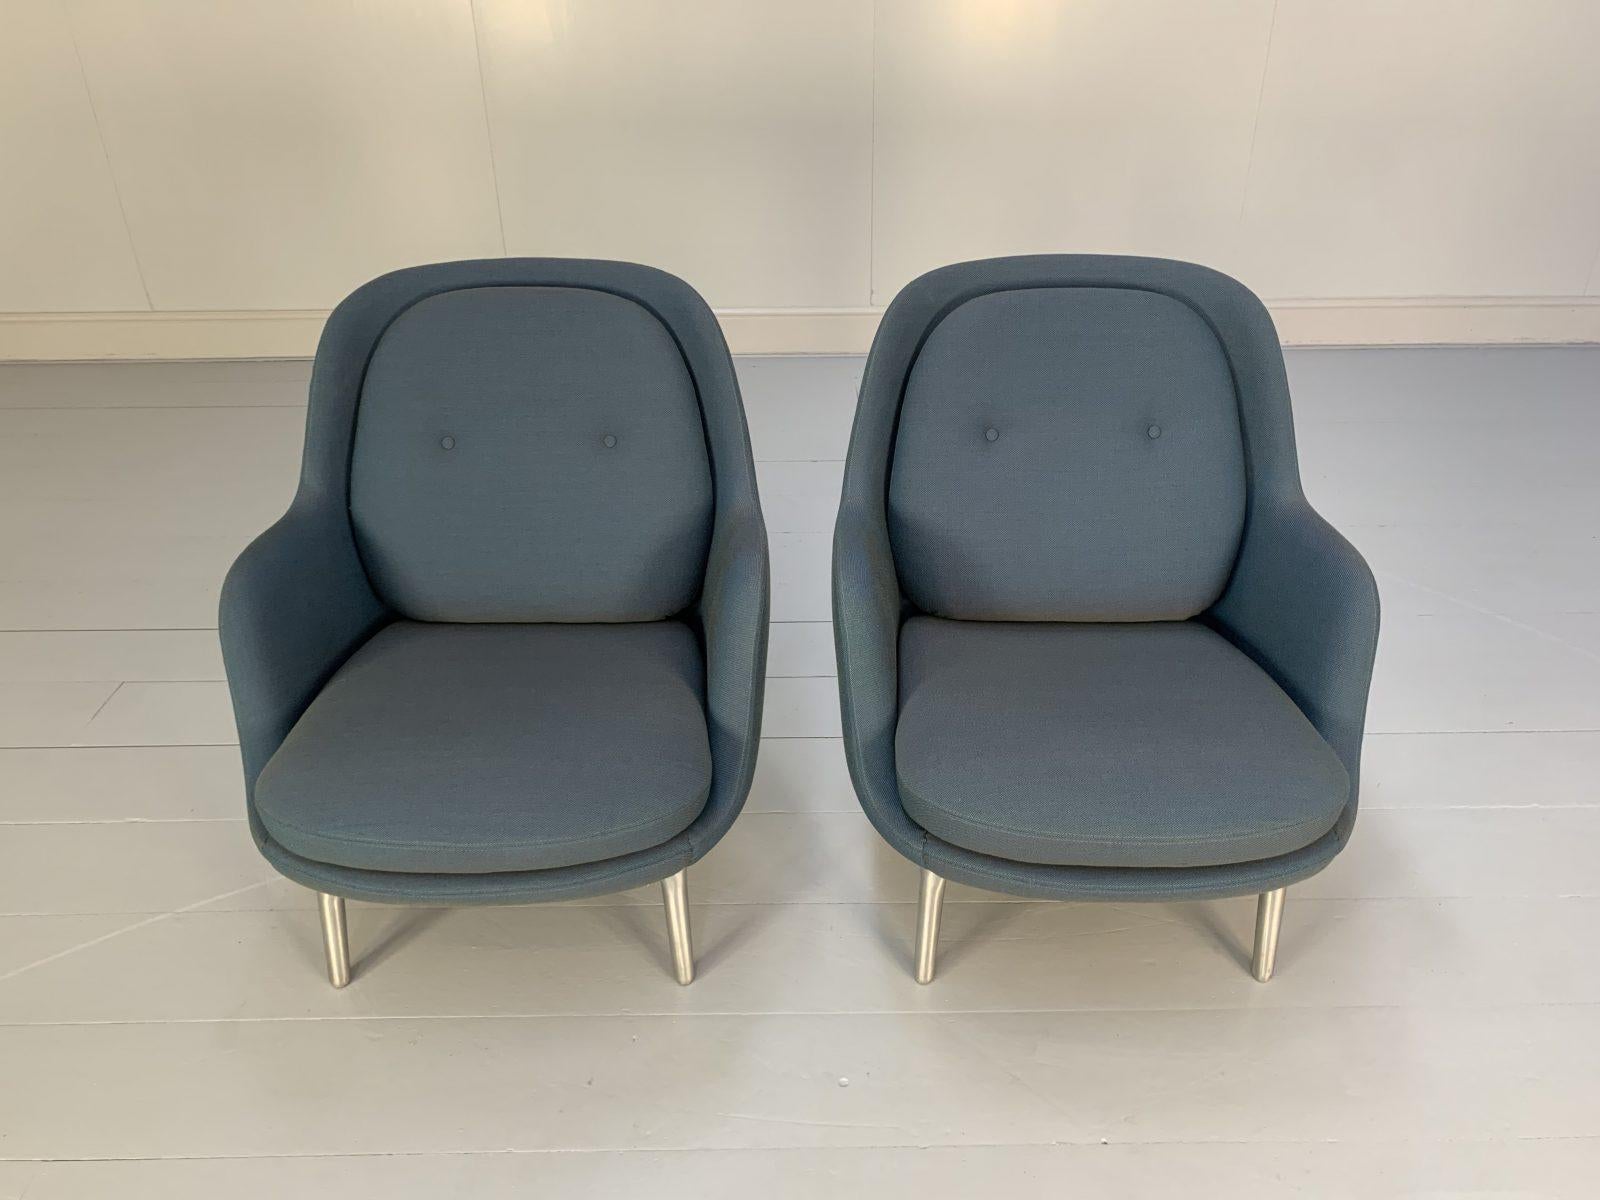 Pair of Fritz Hansen “Fri” Lounge Armchairs in Blue Fabric In Good Condition For Sale In Barrowford, GB